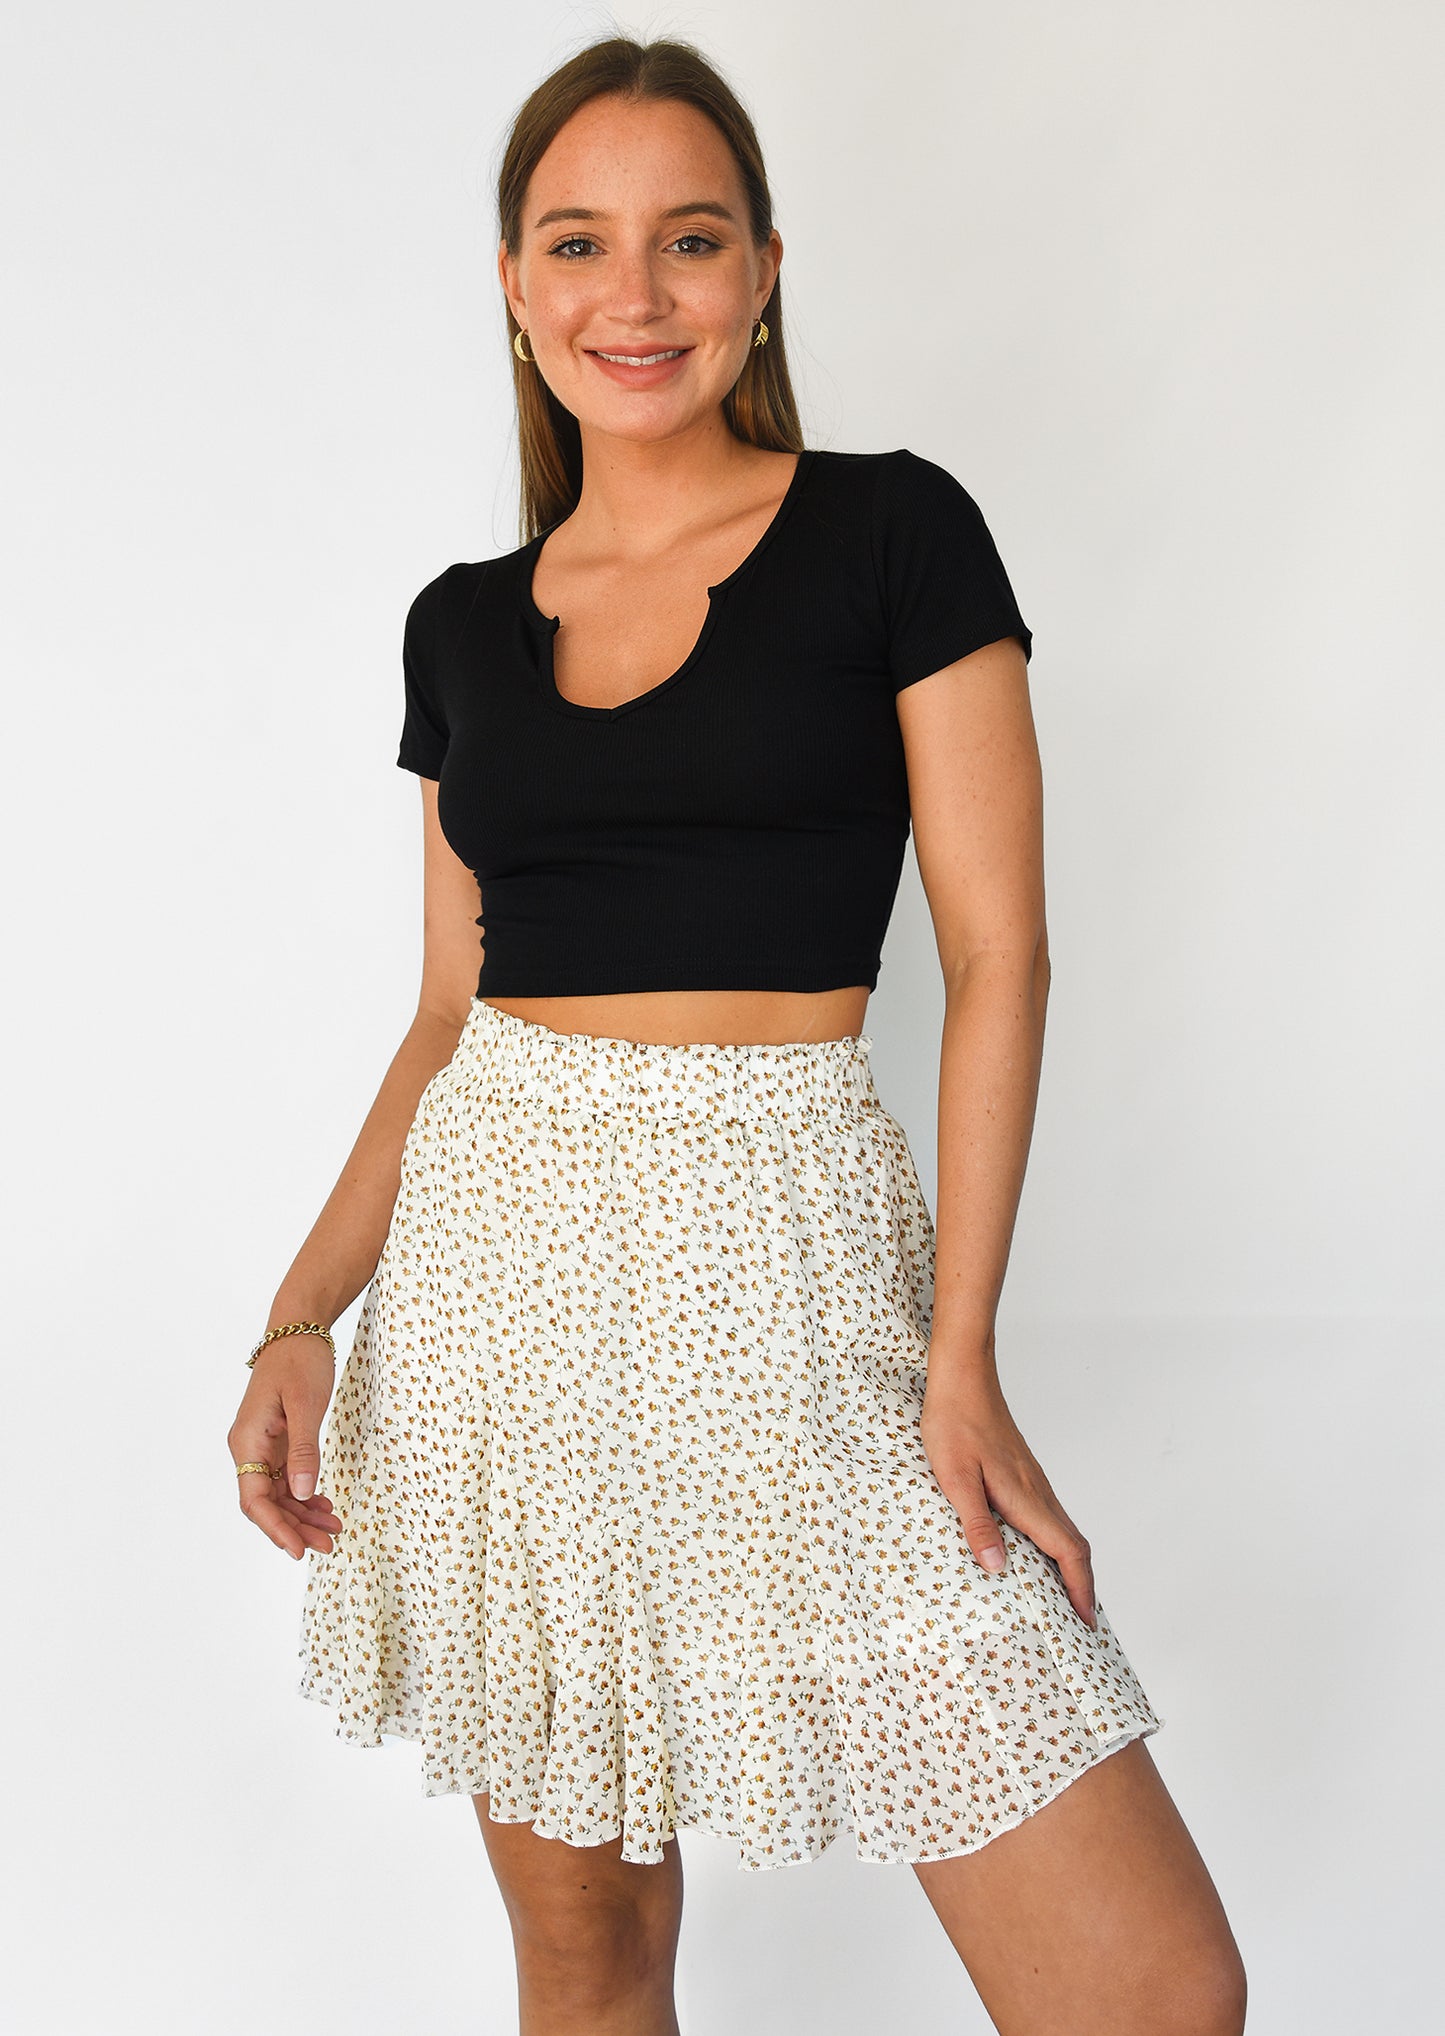 Ruffle floral skirt in beige